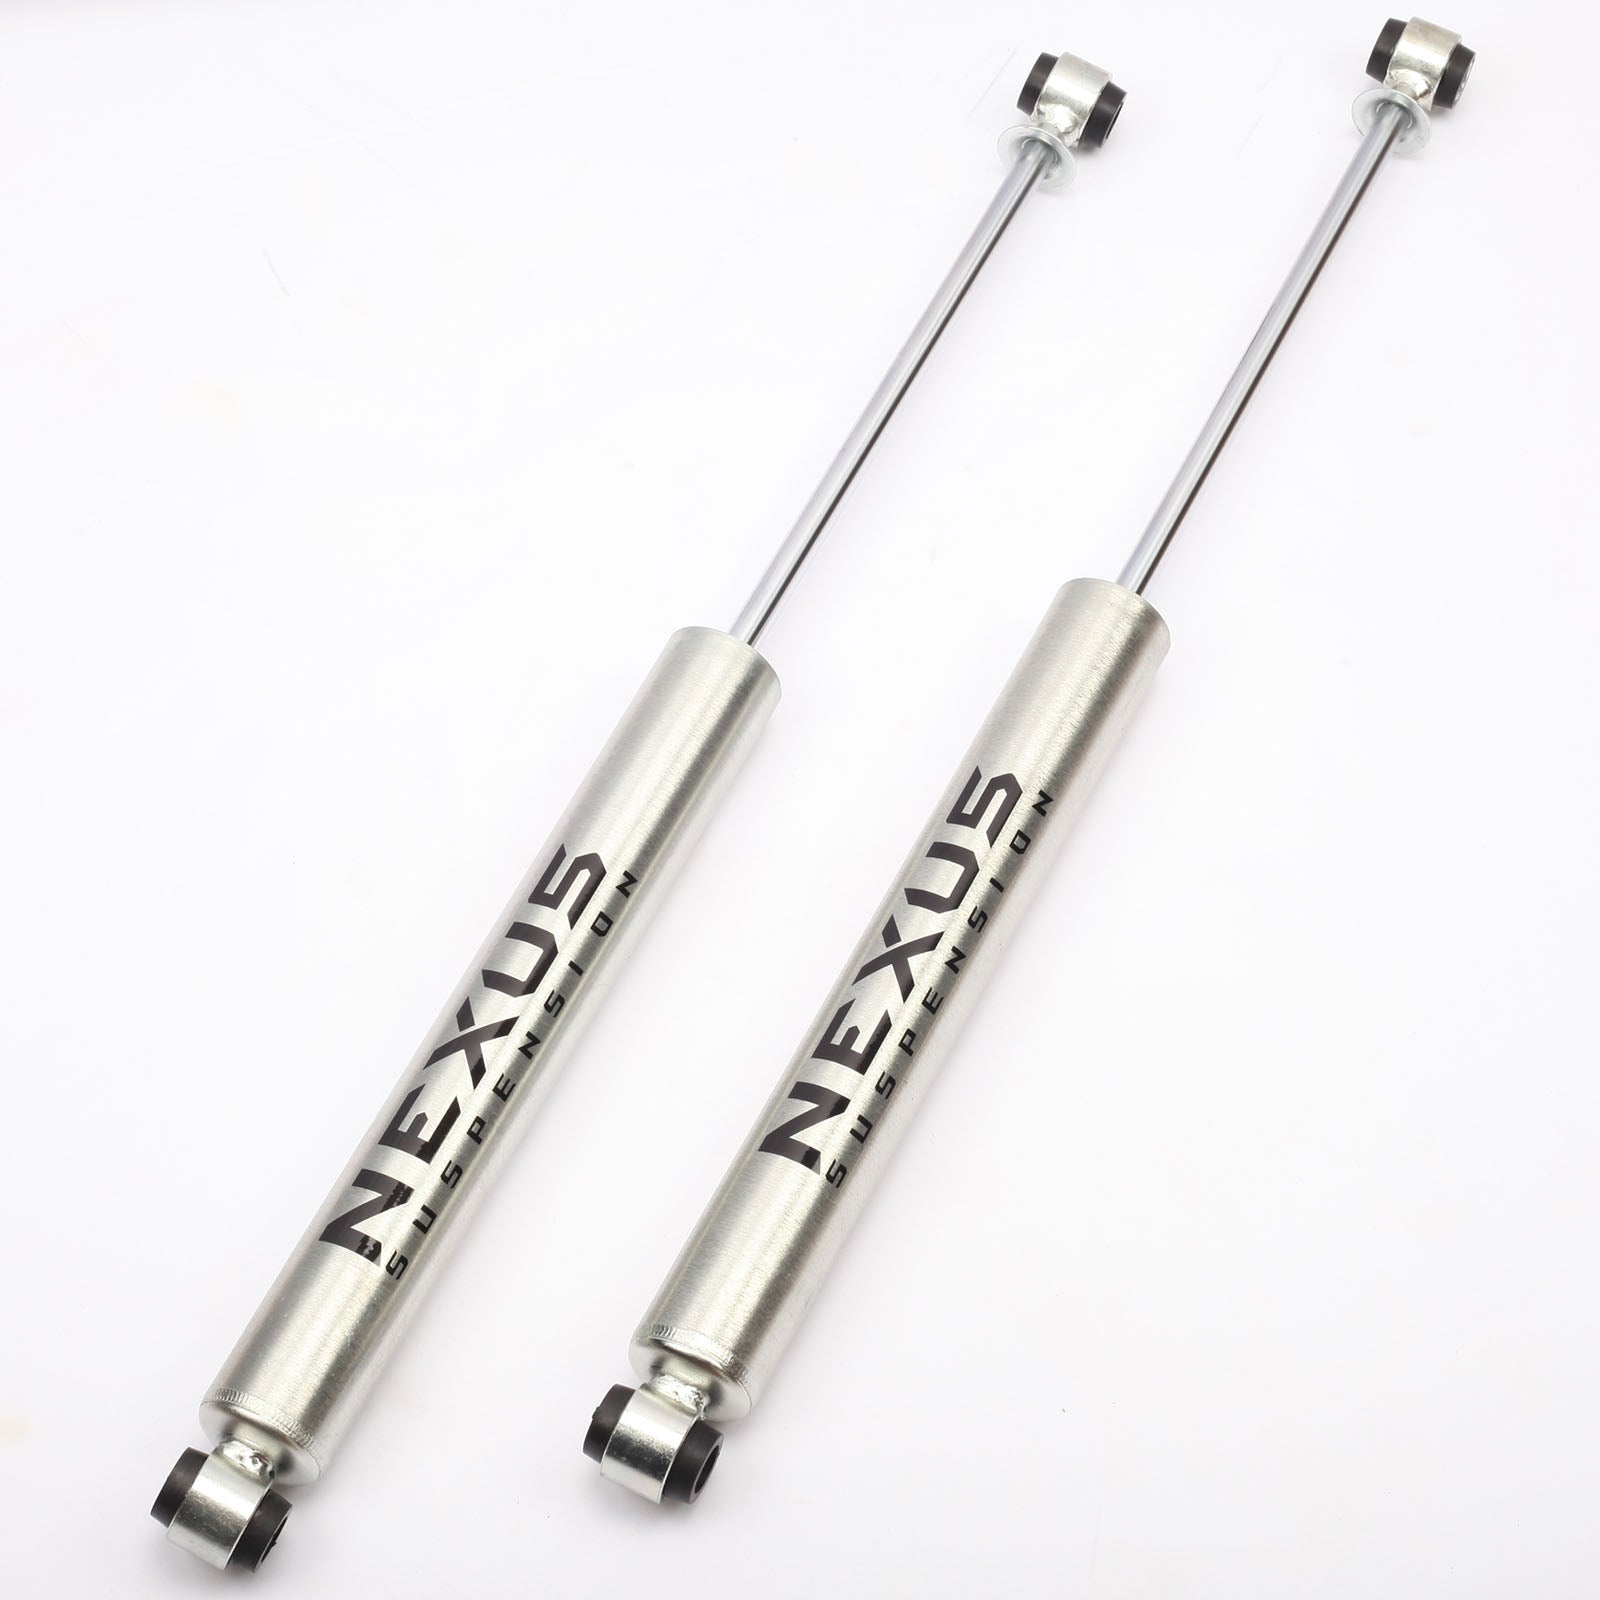 NEXUS SUSPENSION 5Inch Lift Rear Shock Absorber for 2002-2006 Chevrolet Avalanche 2500,Zinc Plated Coating,Pair Pack